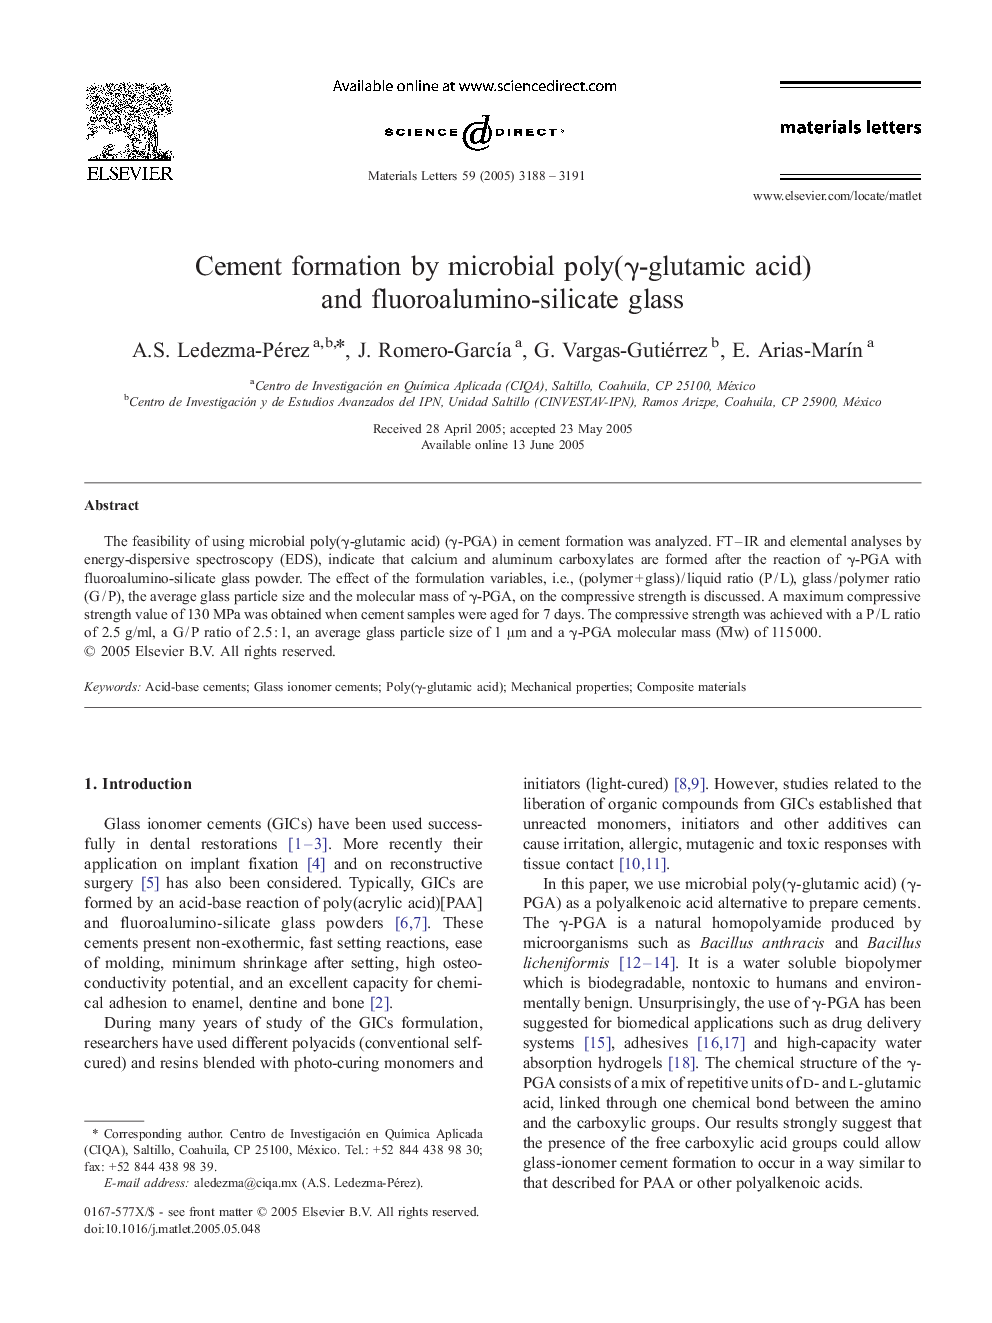 Cement formation by microbial poly(γ-glutamic acid) and fluoroalumino-silicate glass